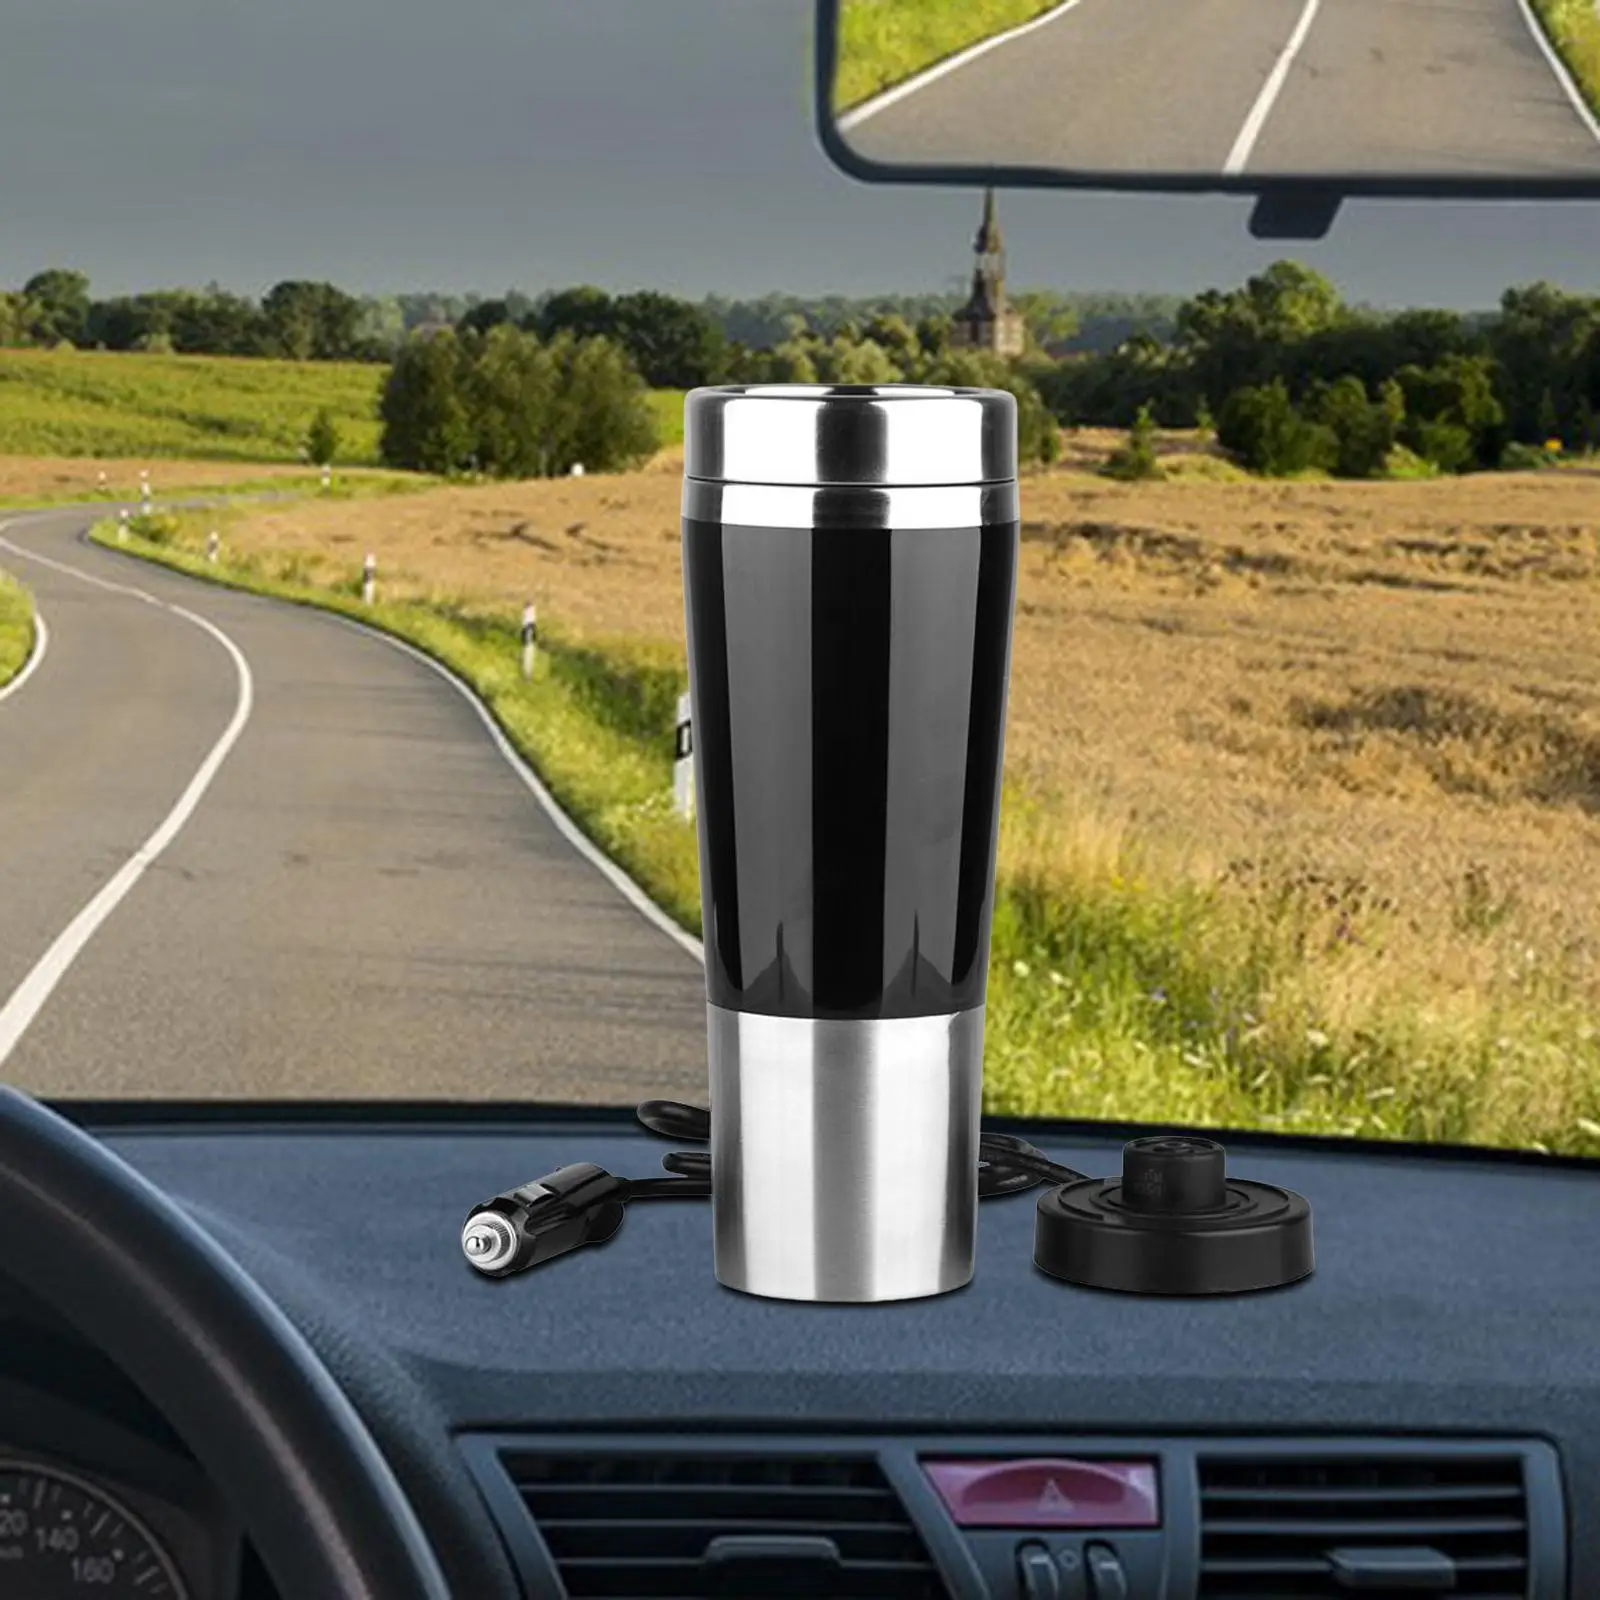 Portable 12V Car Kettle Boiler Heating Insulated Cup for Milk Travel